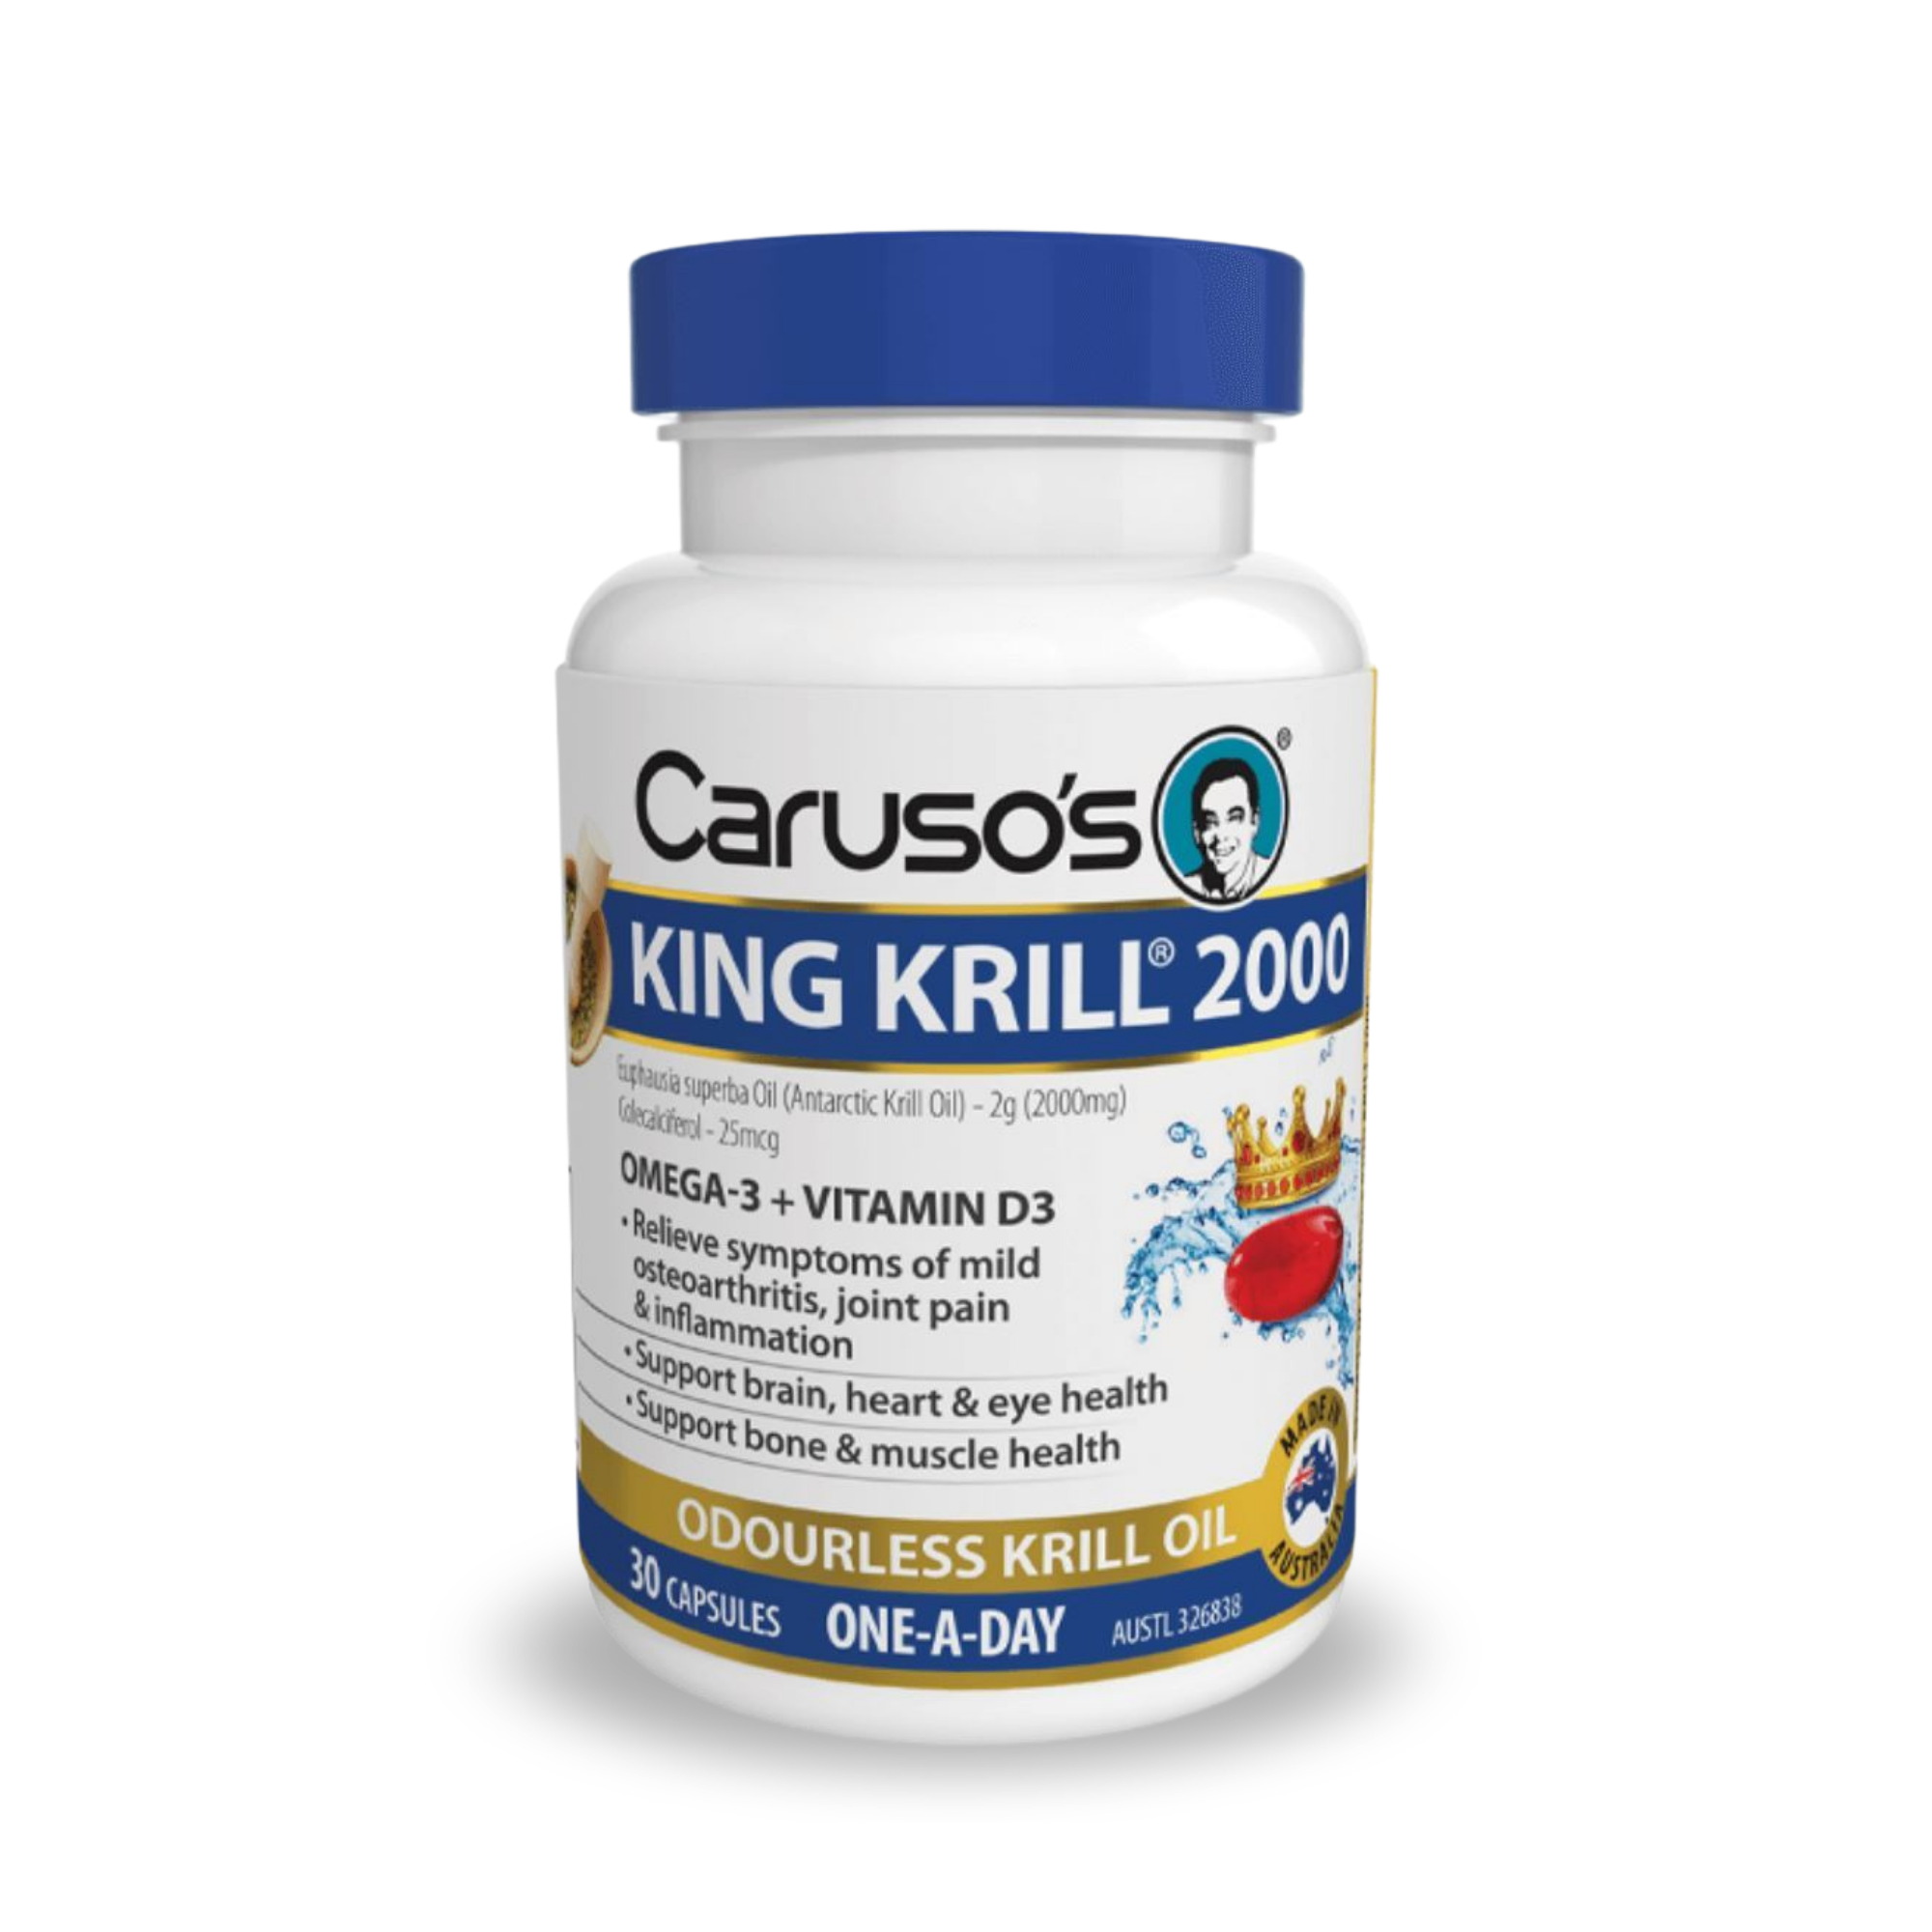 Carusos King Krill 2000mg 30 Capsules